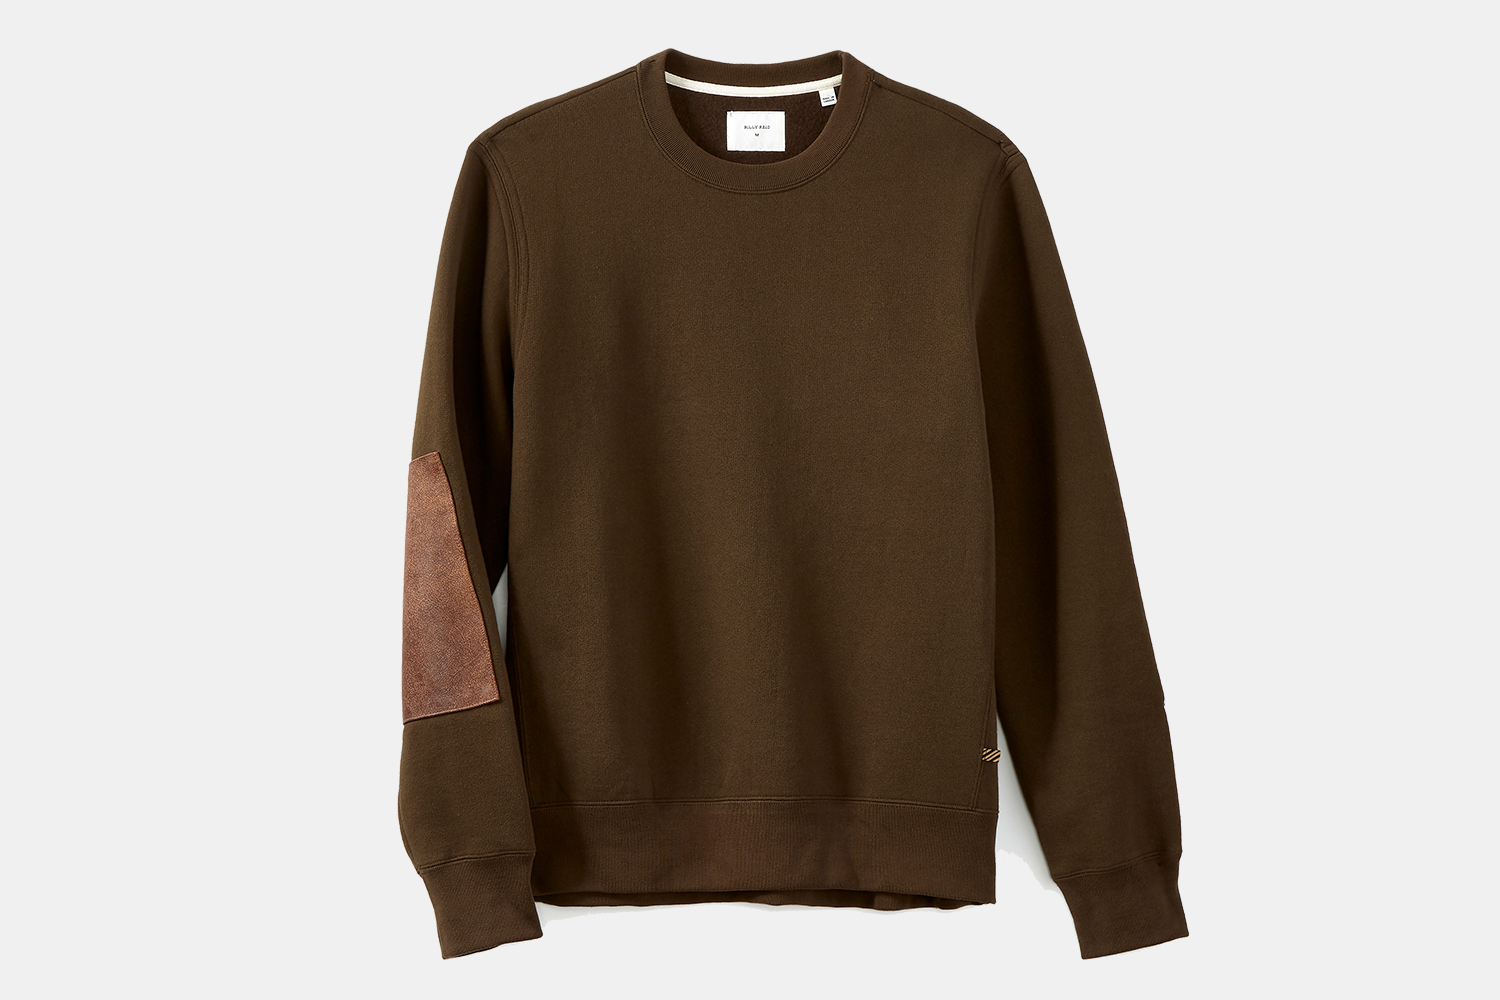 Brown sweatshirt with elbow patches from Billy Reid